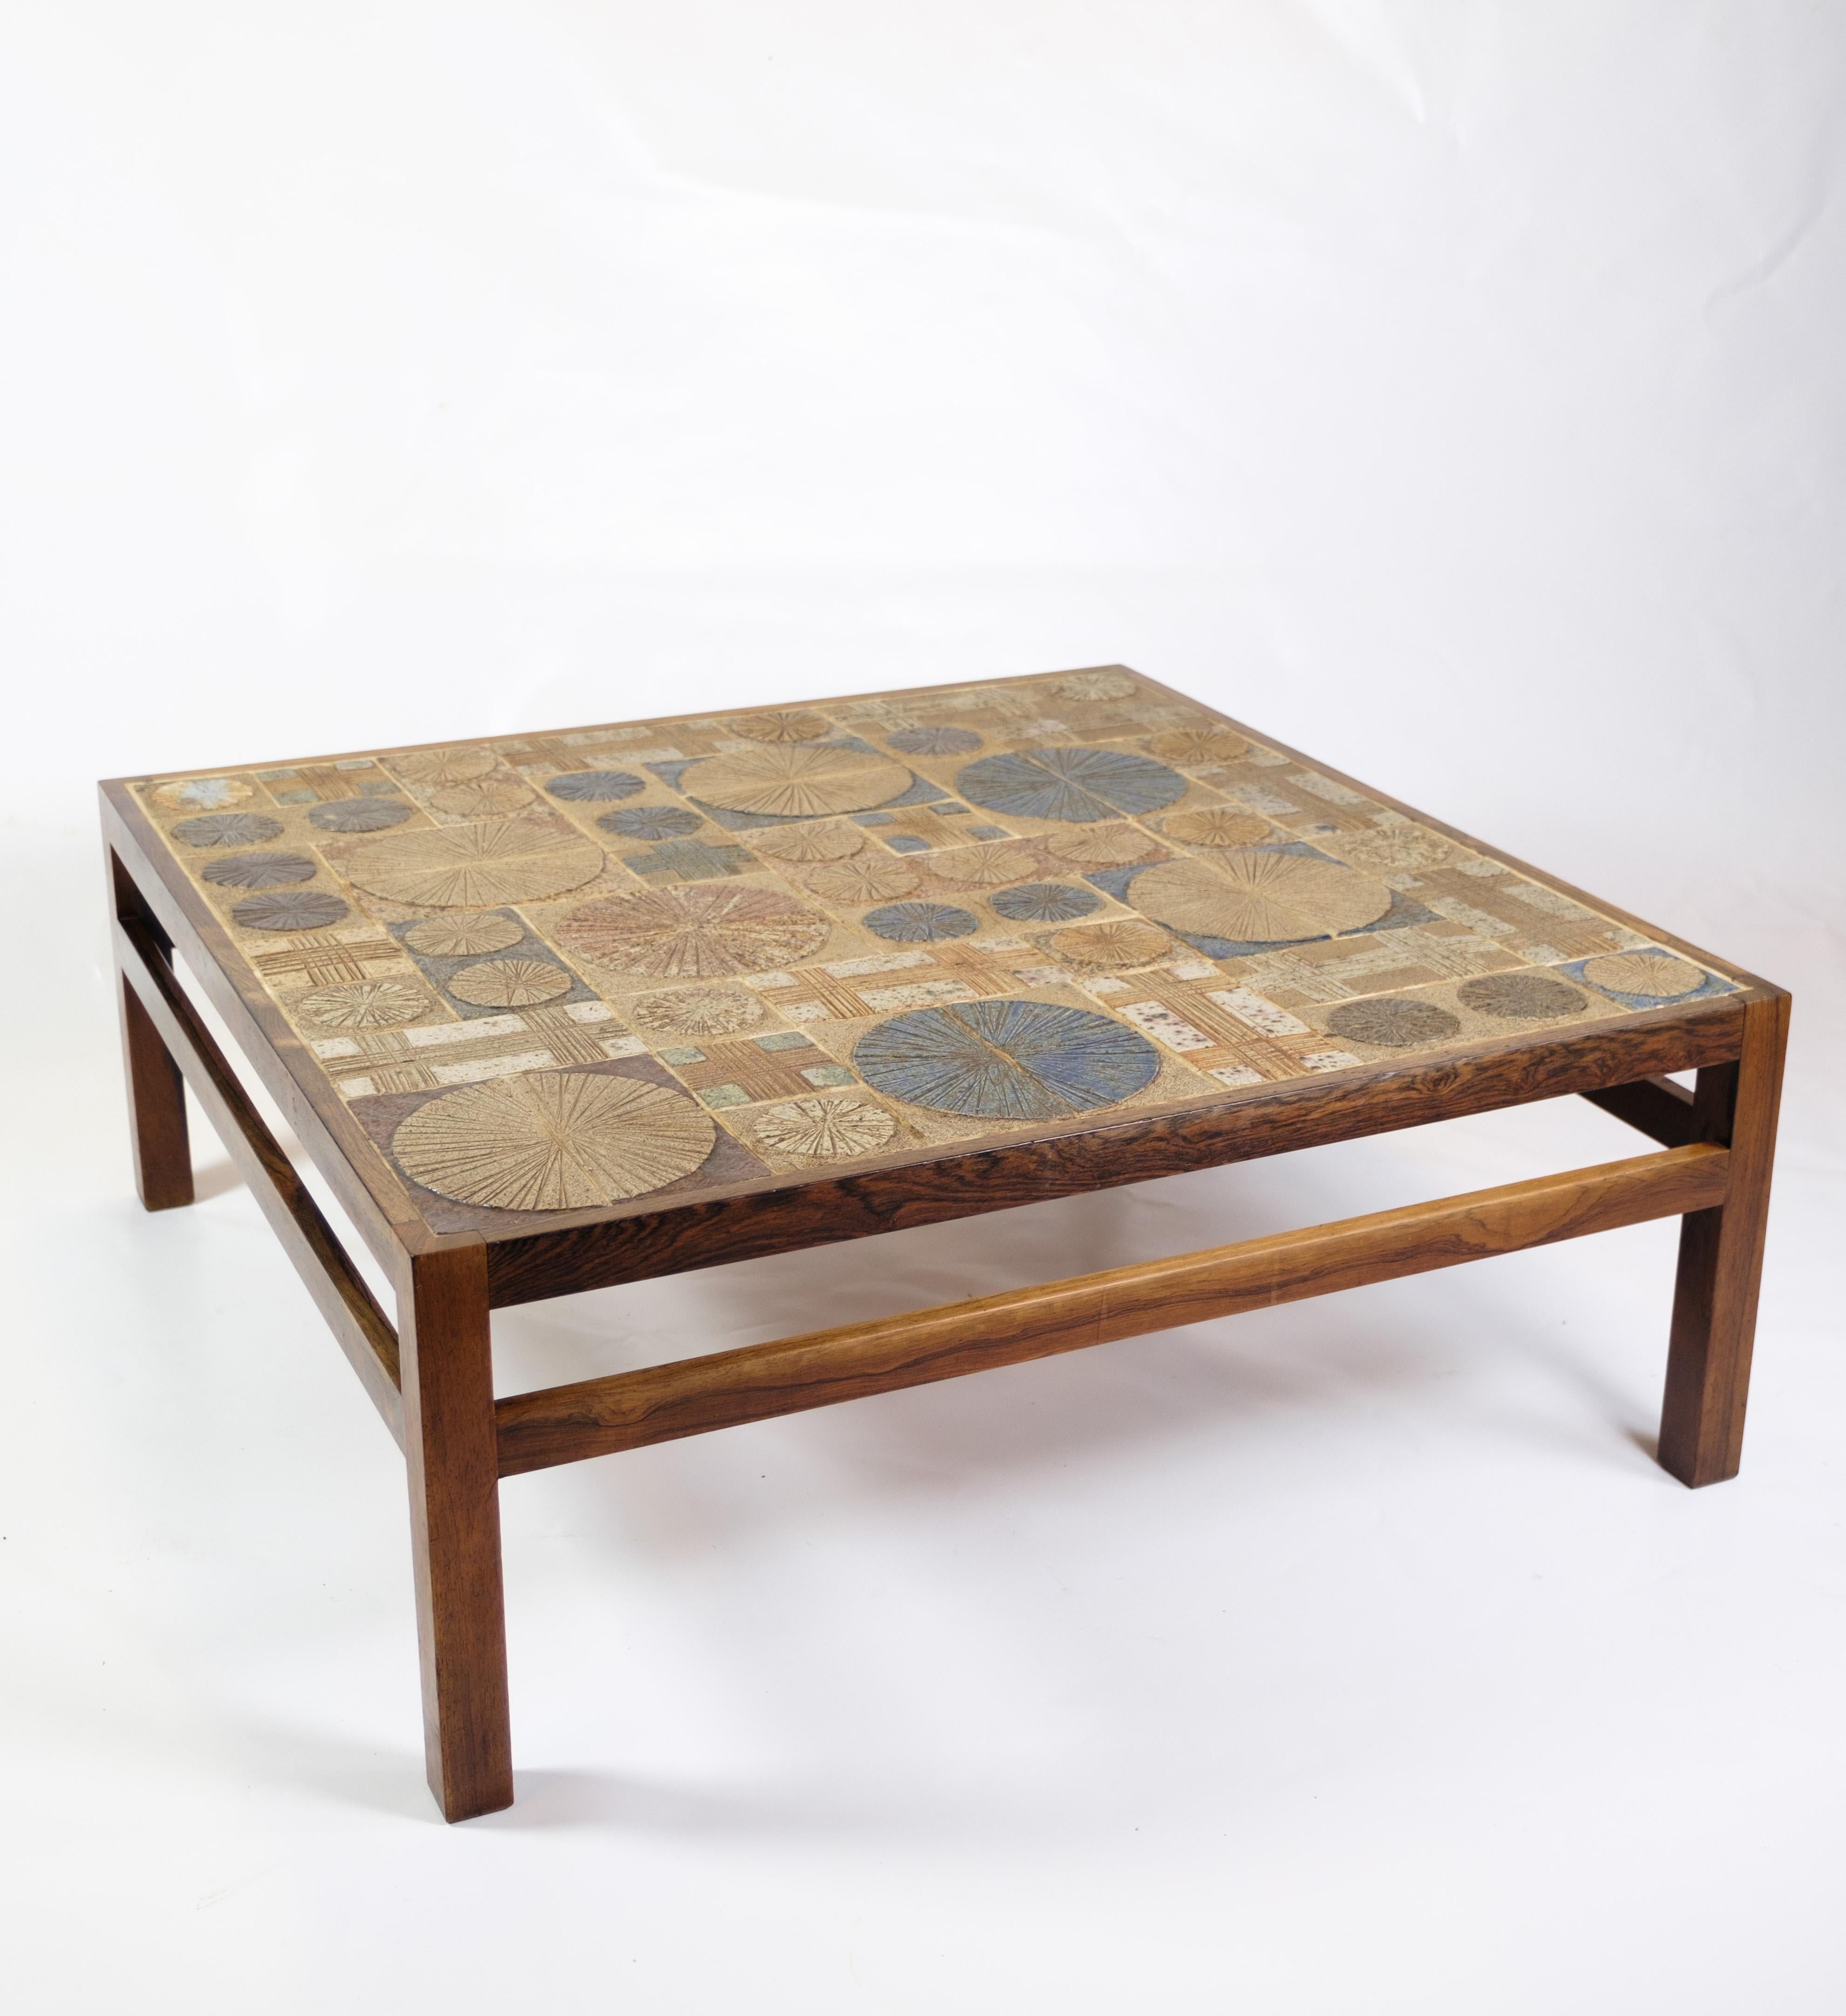 Ceramic Sofa Table Made In Rosewood With Tiles Designed By Tue Poulsen From 1960s For Sale